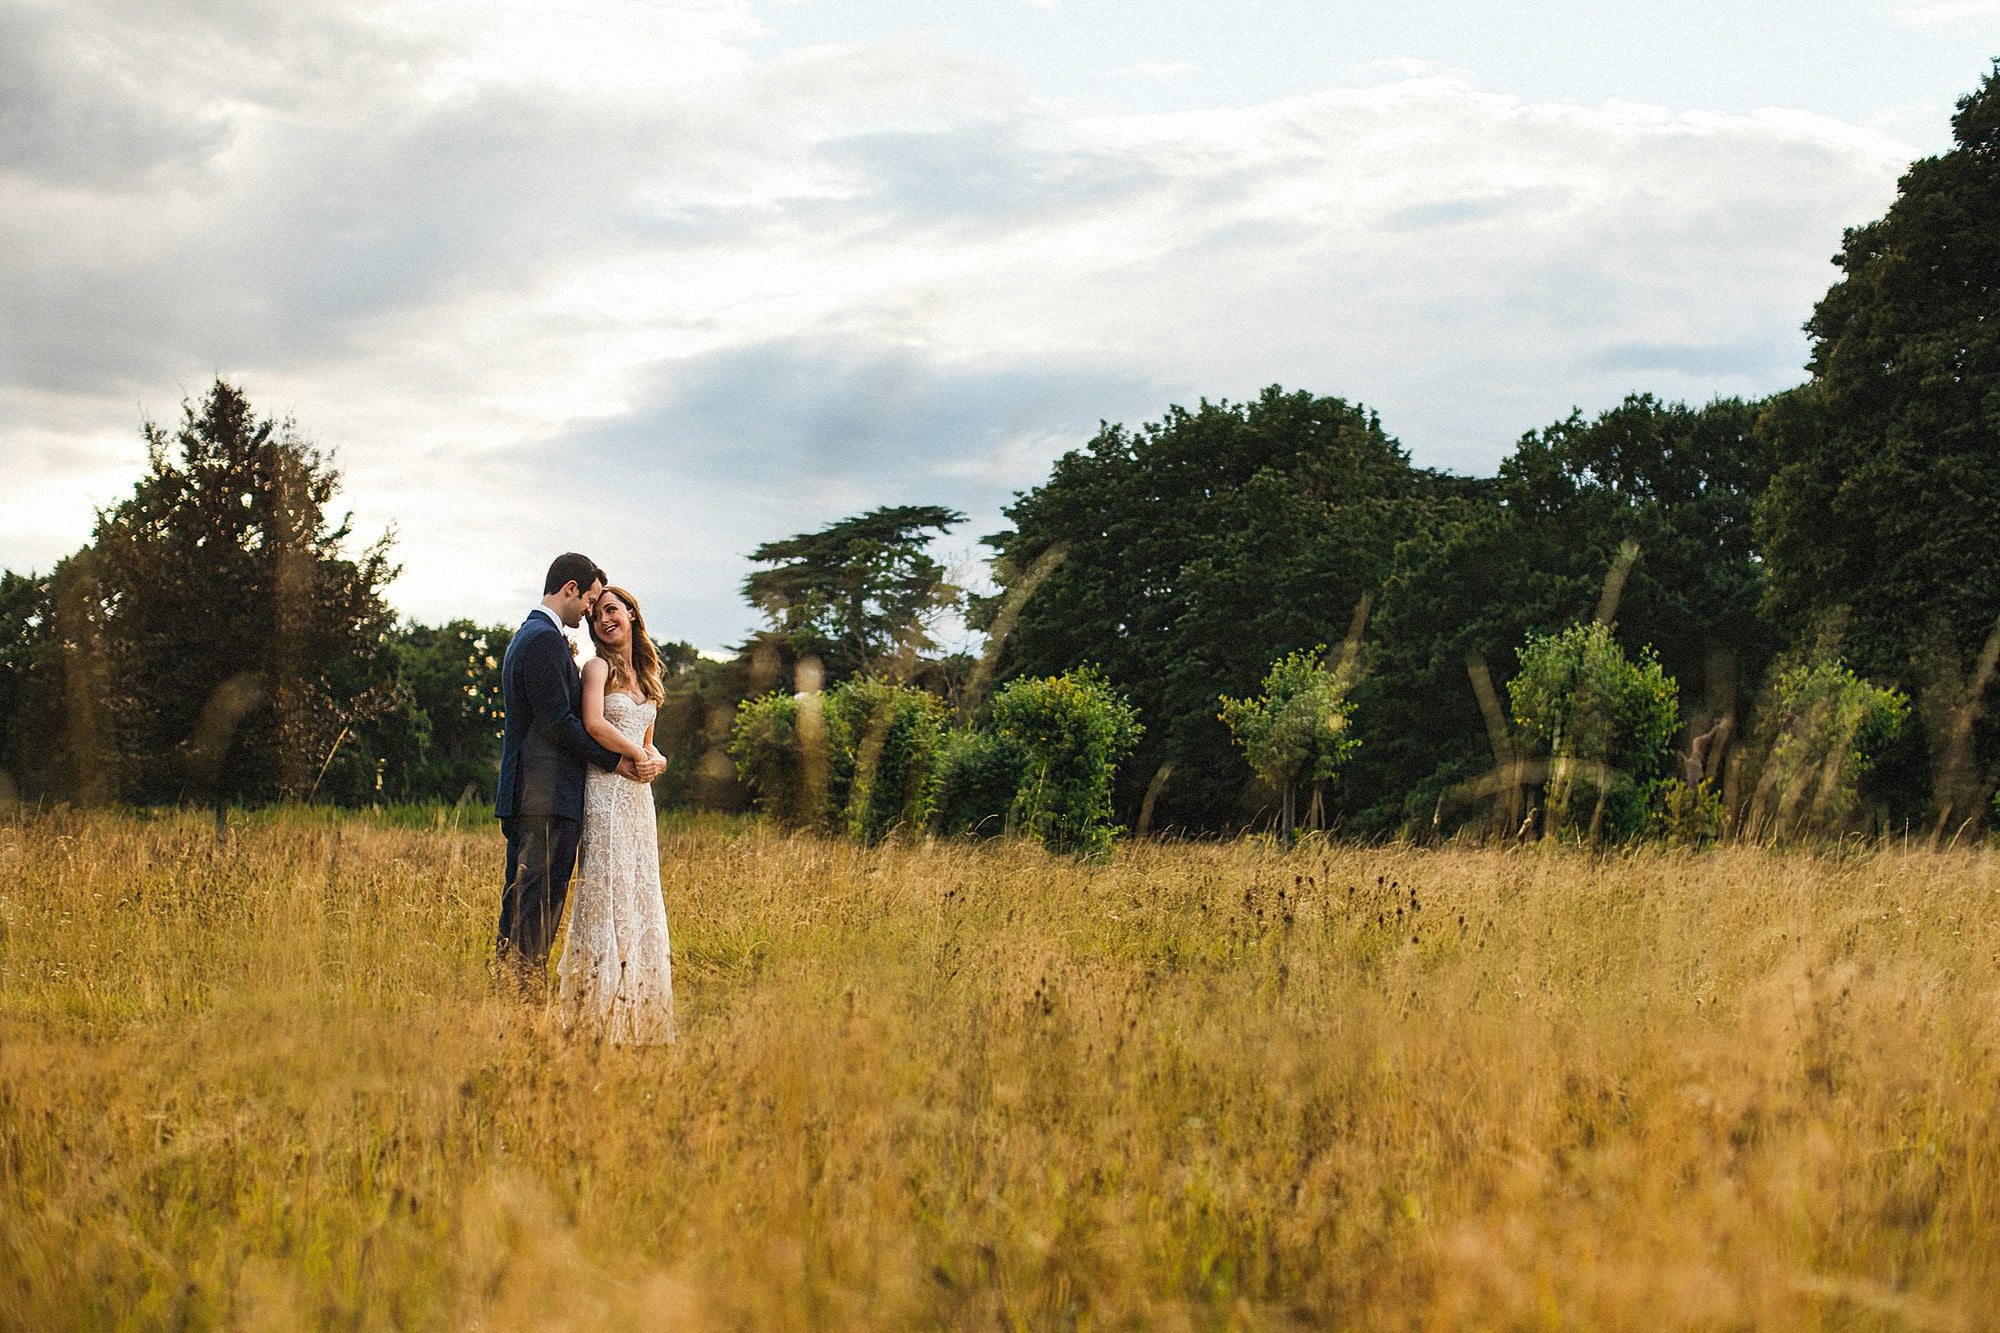 bride and groom in the grounds at hengrave hall